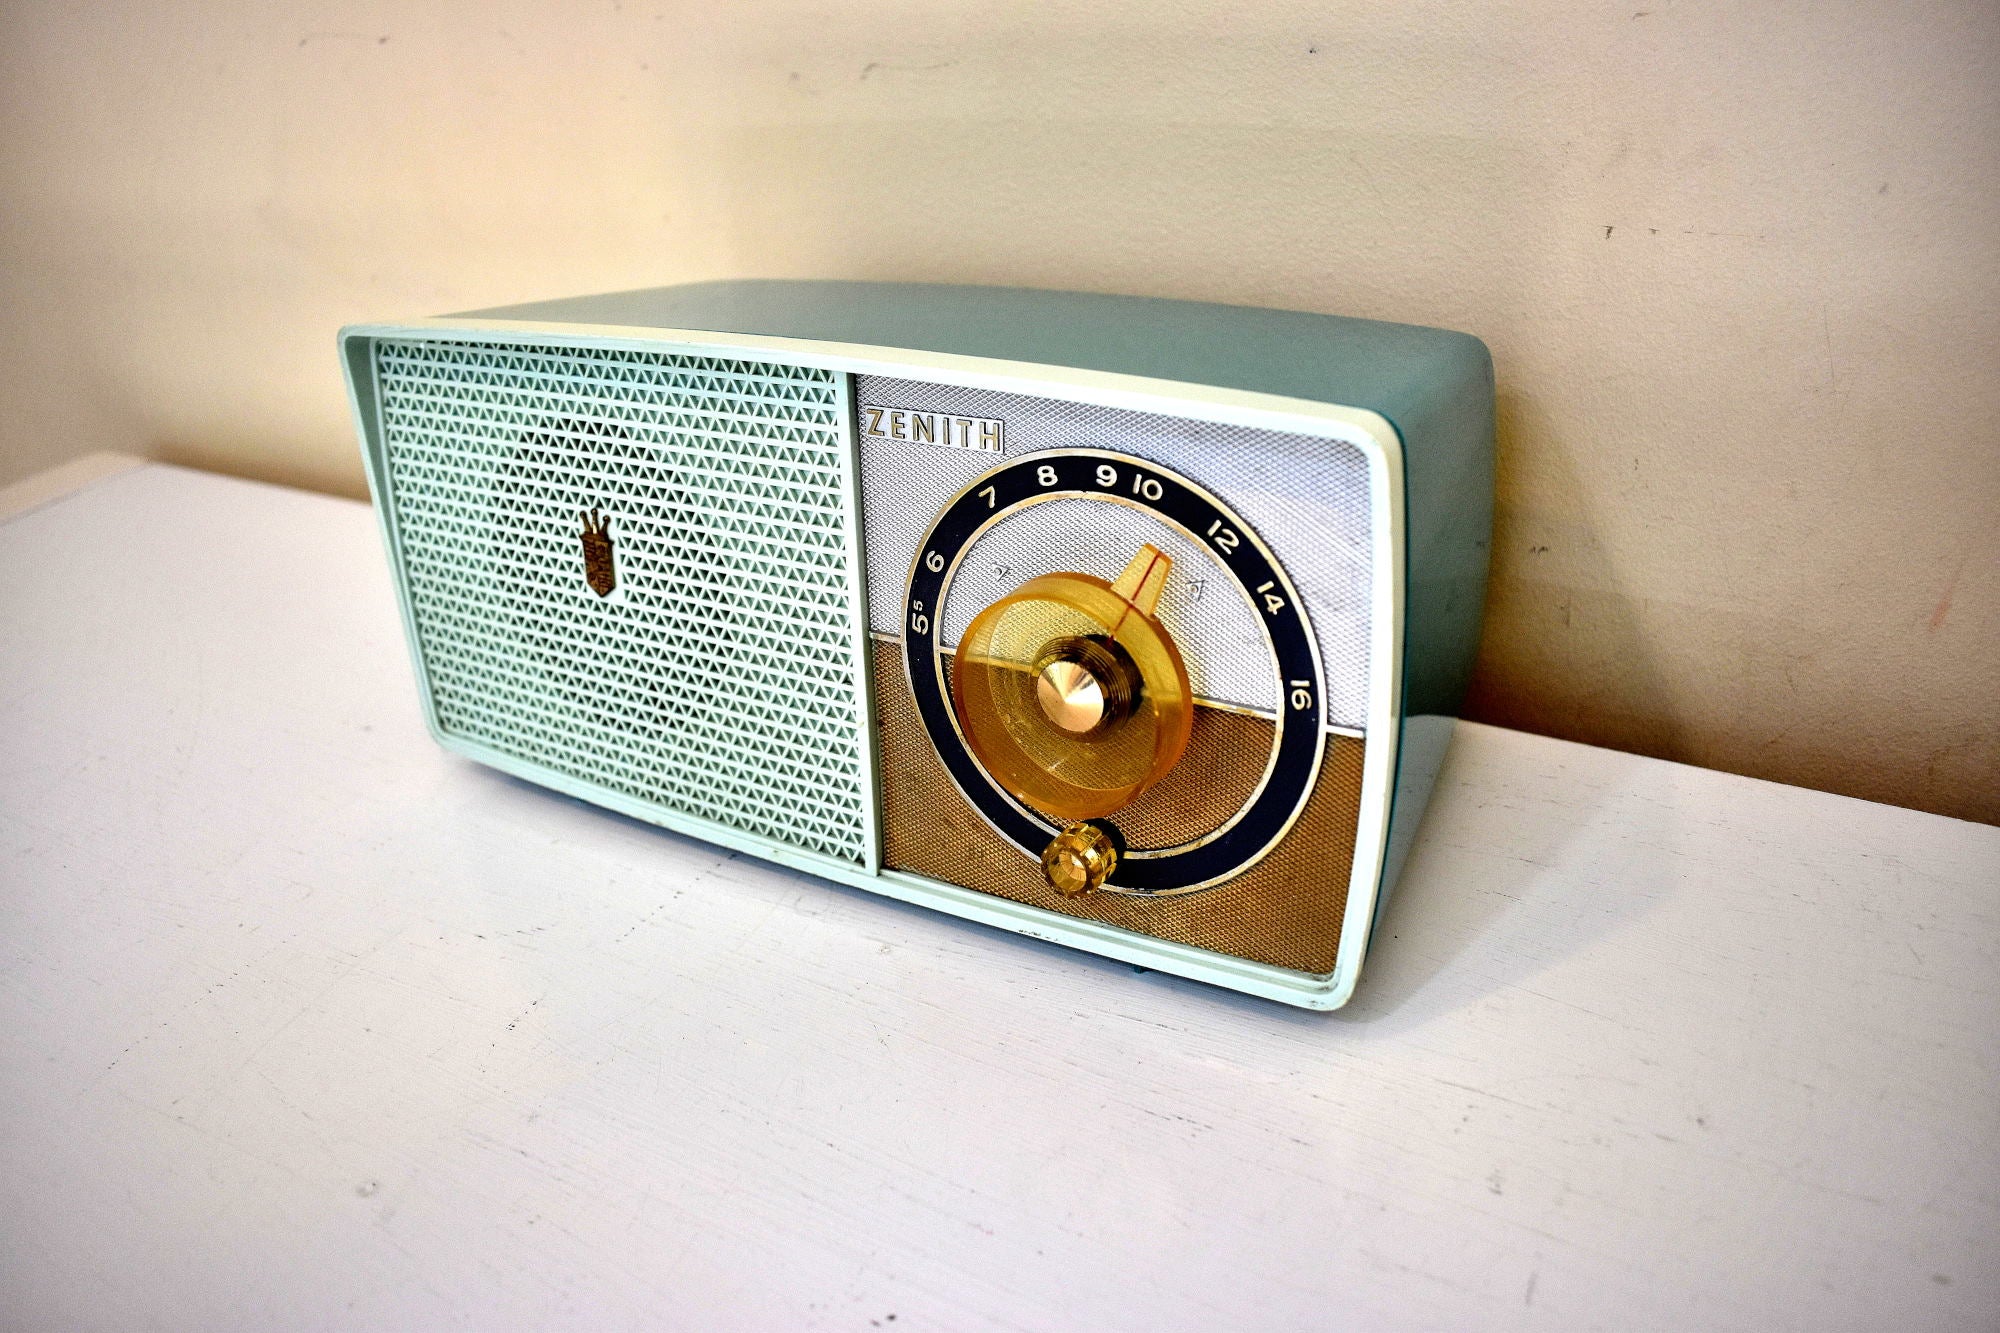 Bluetooth Ready To Go - Turquoise and Frost Blue 1959 Zenith Model B511 